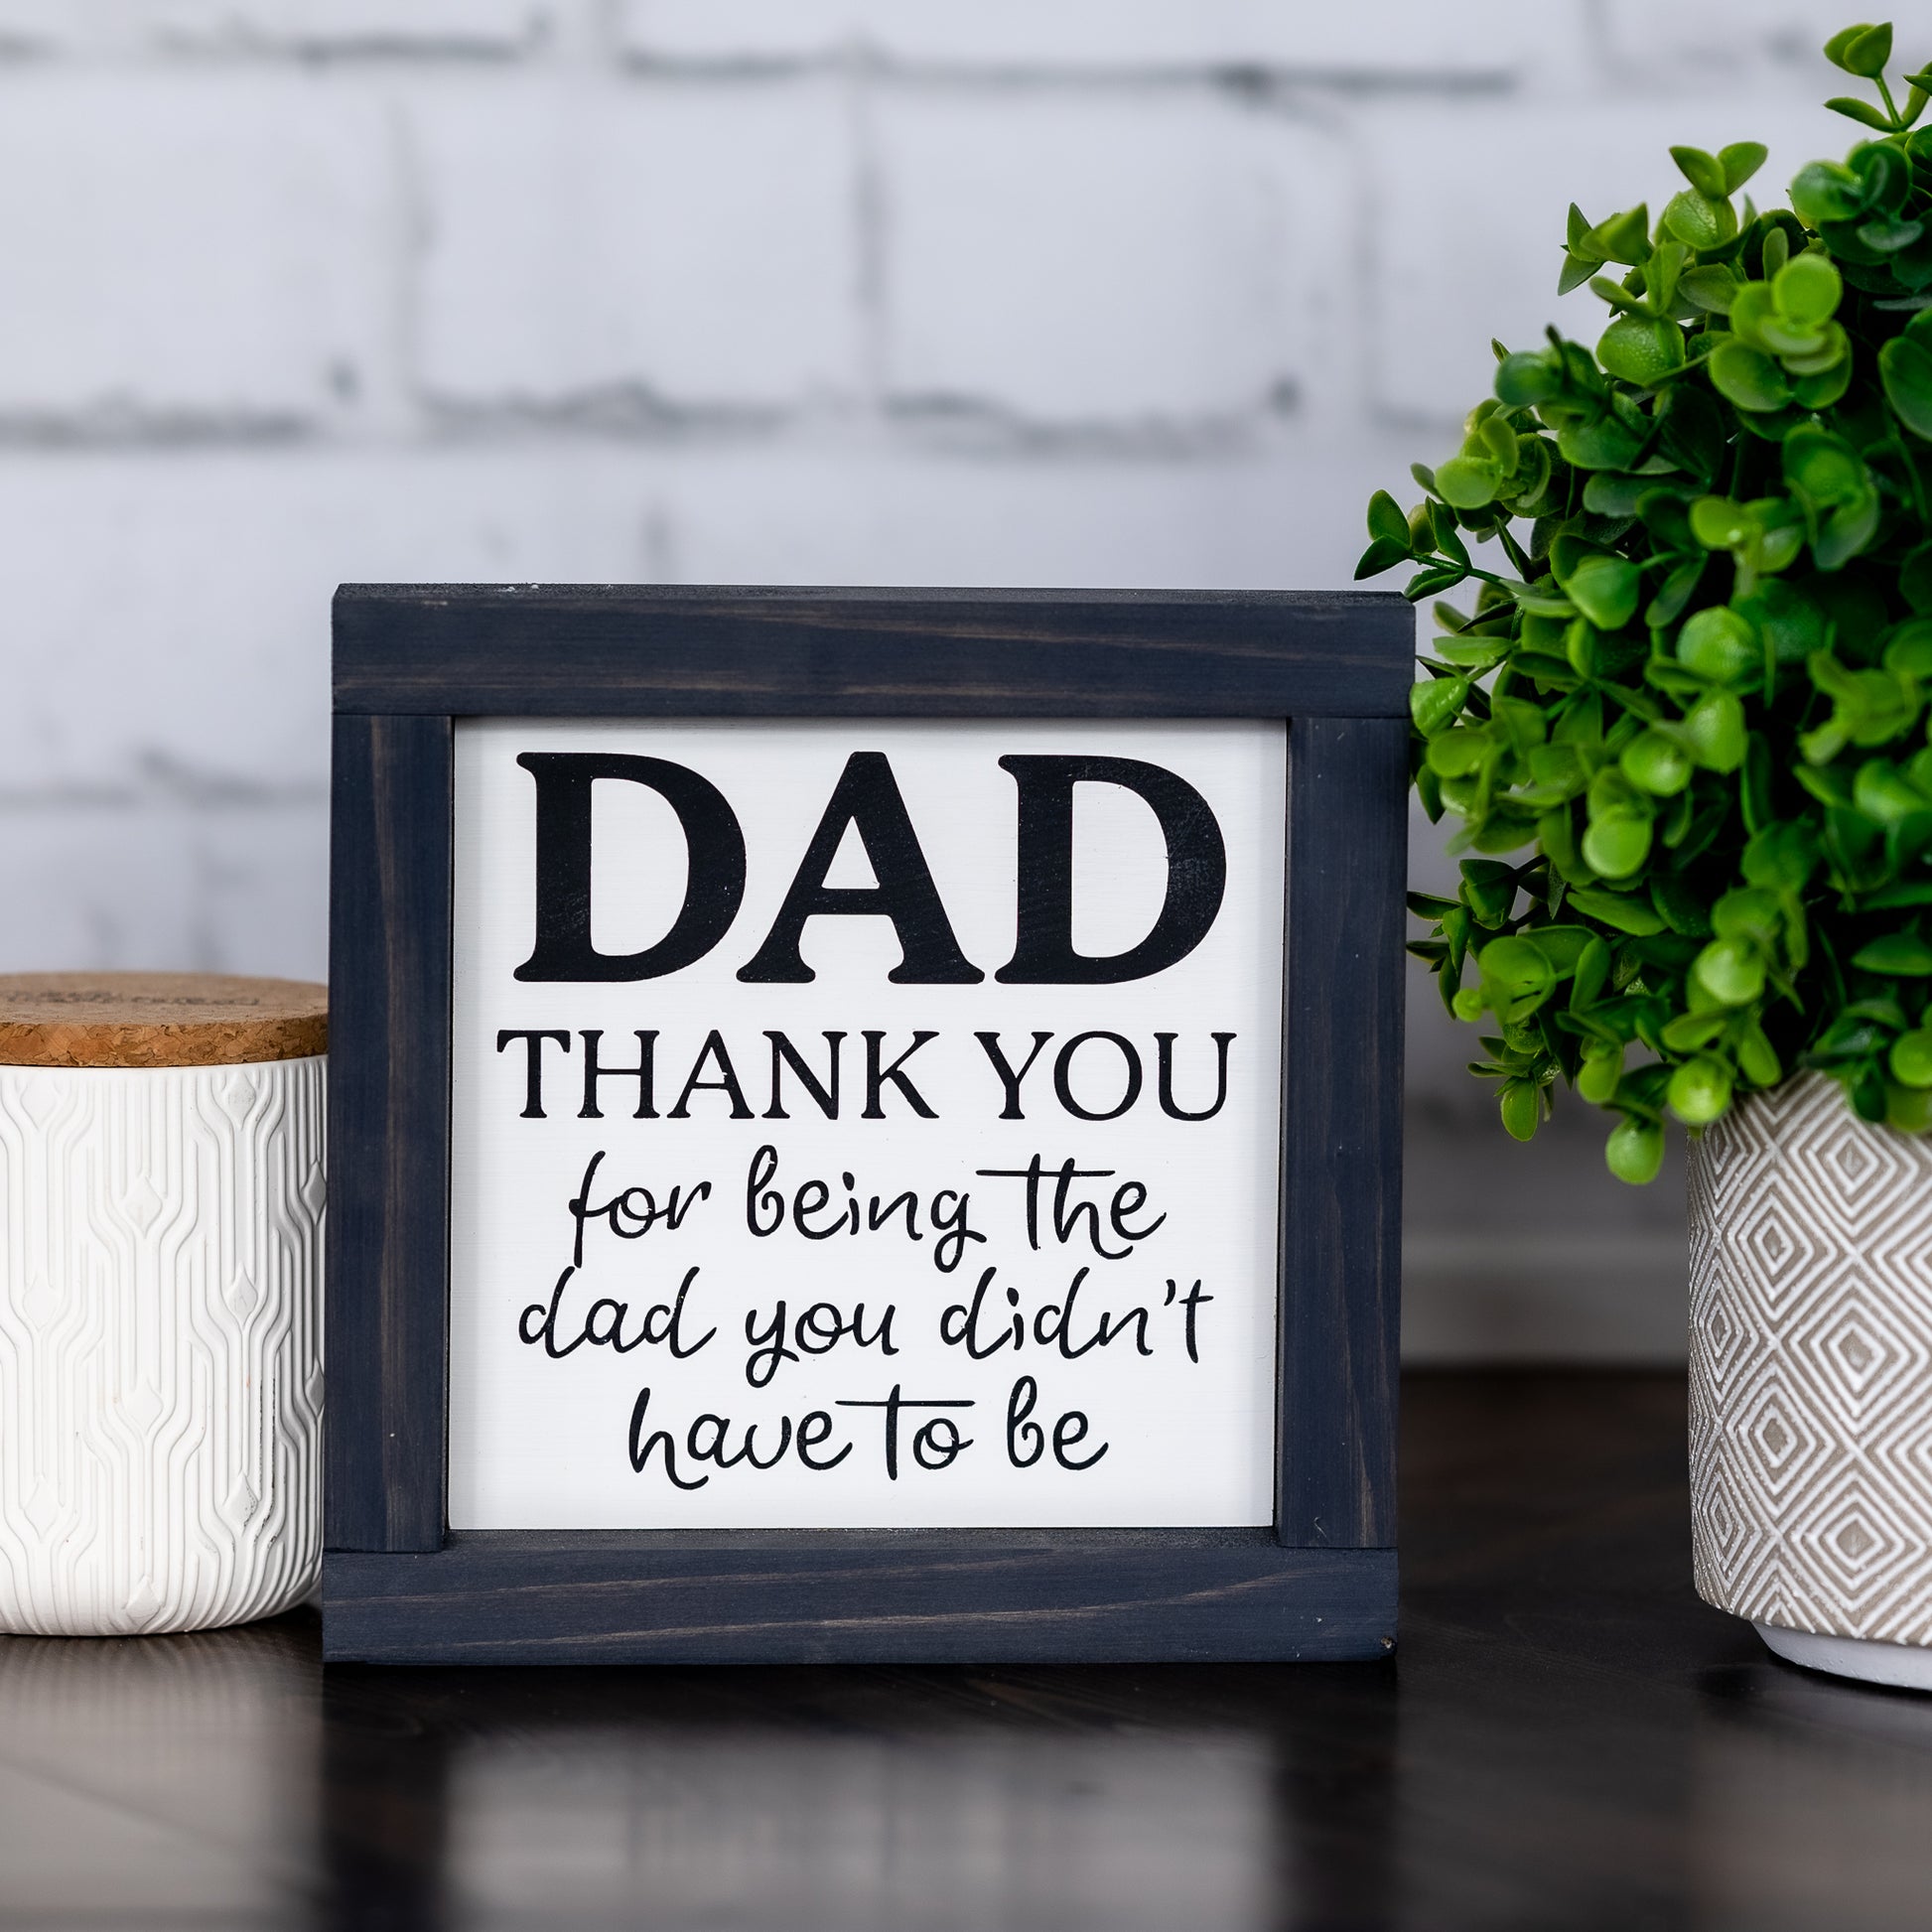 dad, thank you for being the dad you didn't have to be ~ mini sign